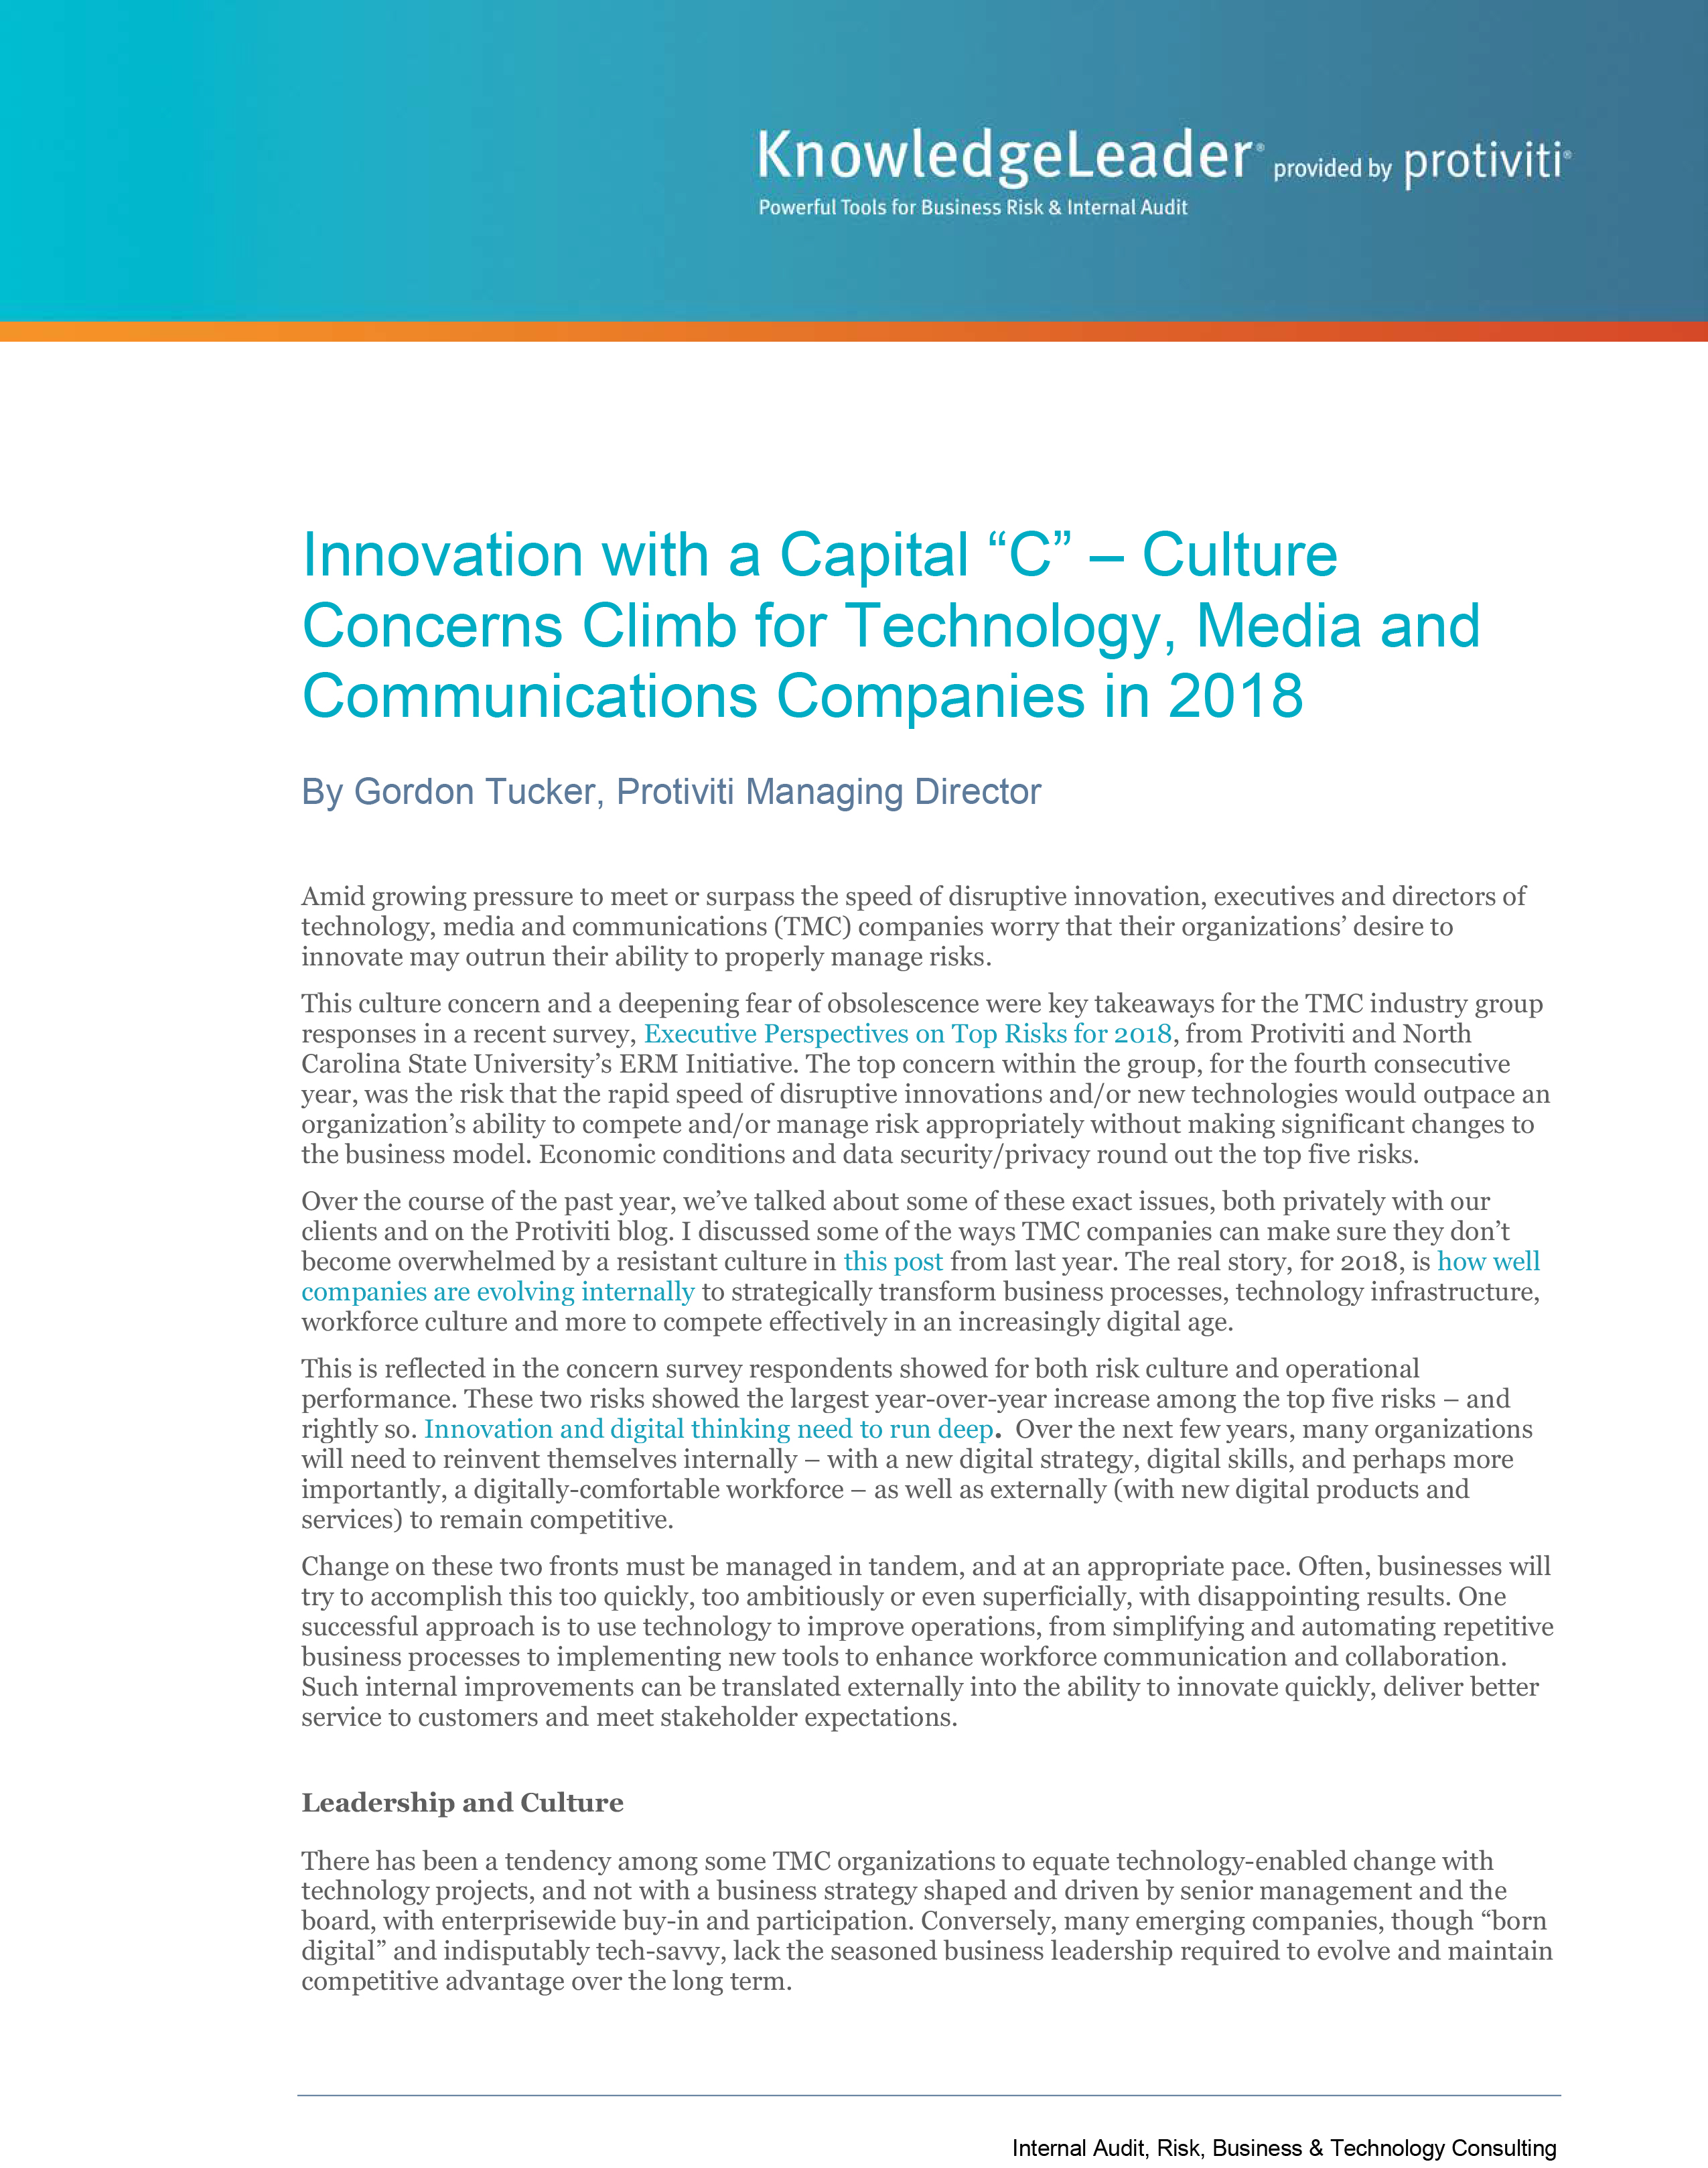 Screenshot of the first page of Innovation with a Capital “C” – Culture Concerns Climb for Technology, Media and Communications Companies in 2018